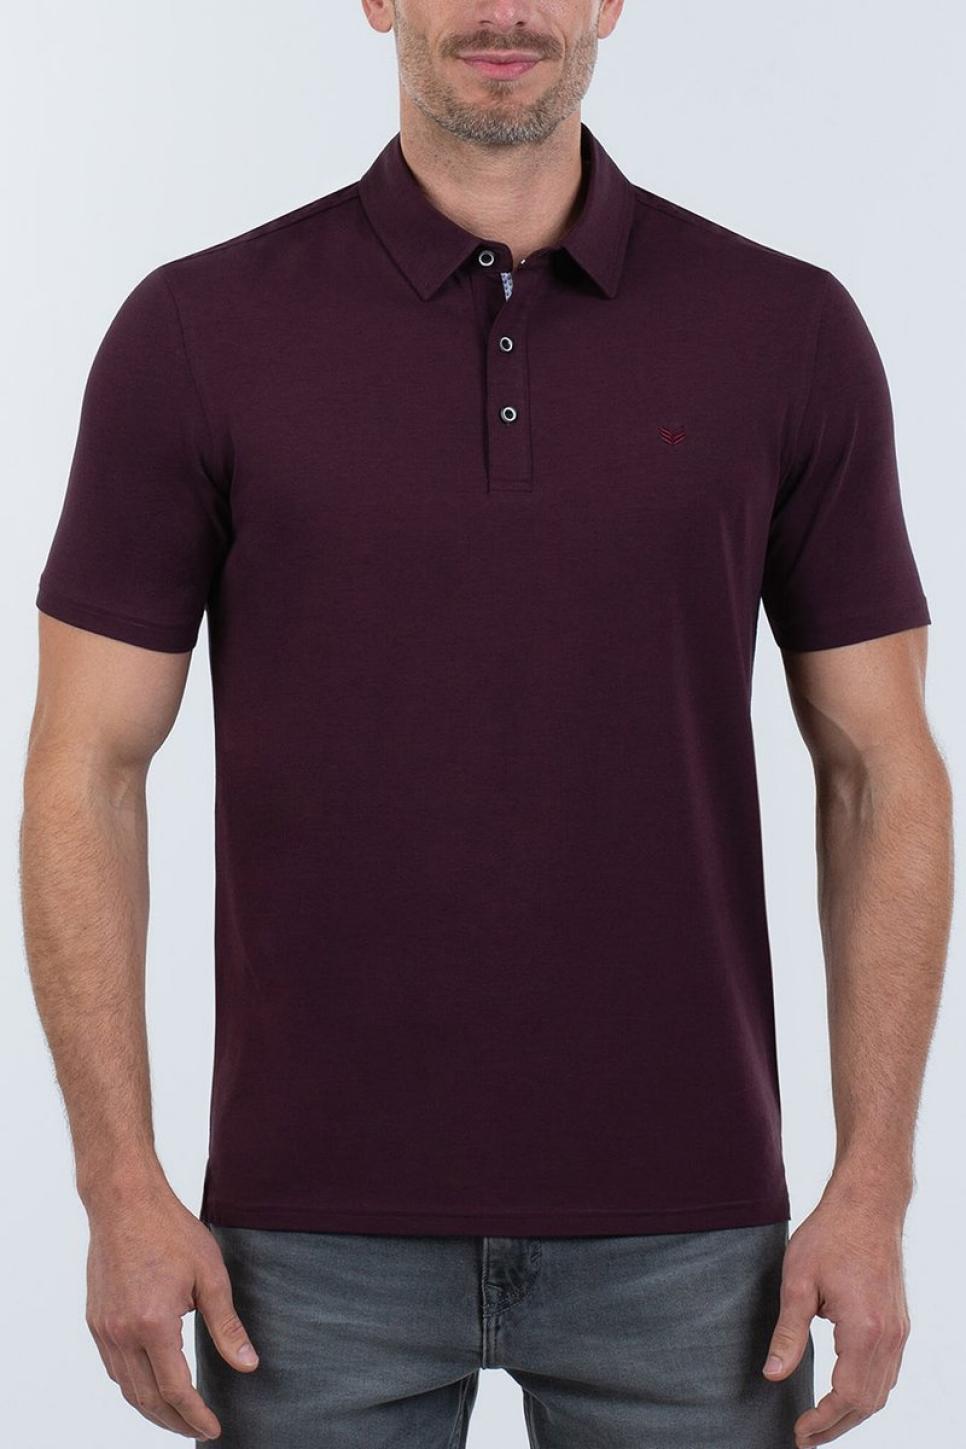 20210907-buttercloth-icy-cotton-polo-maroon.jpg